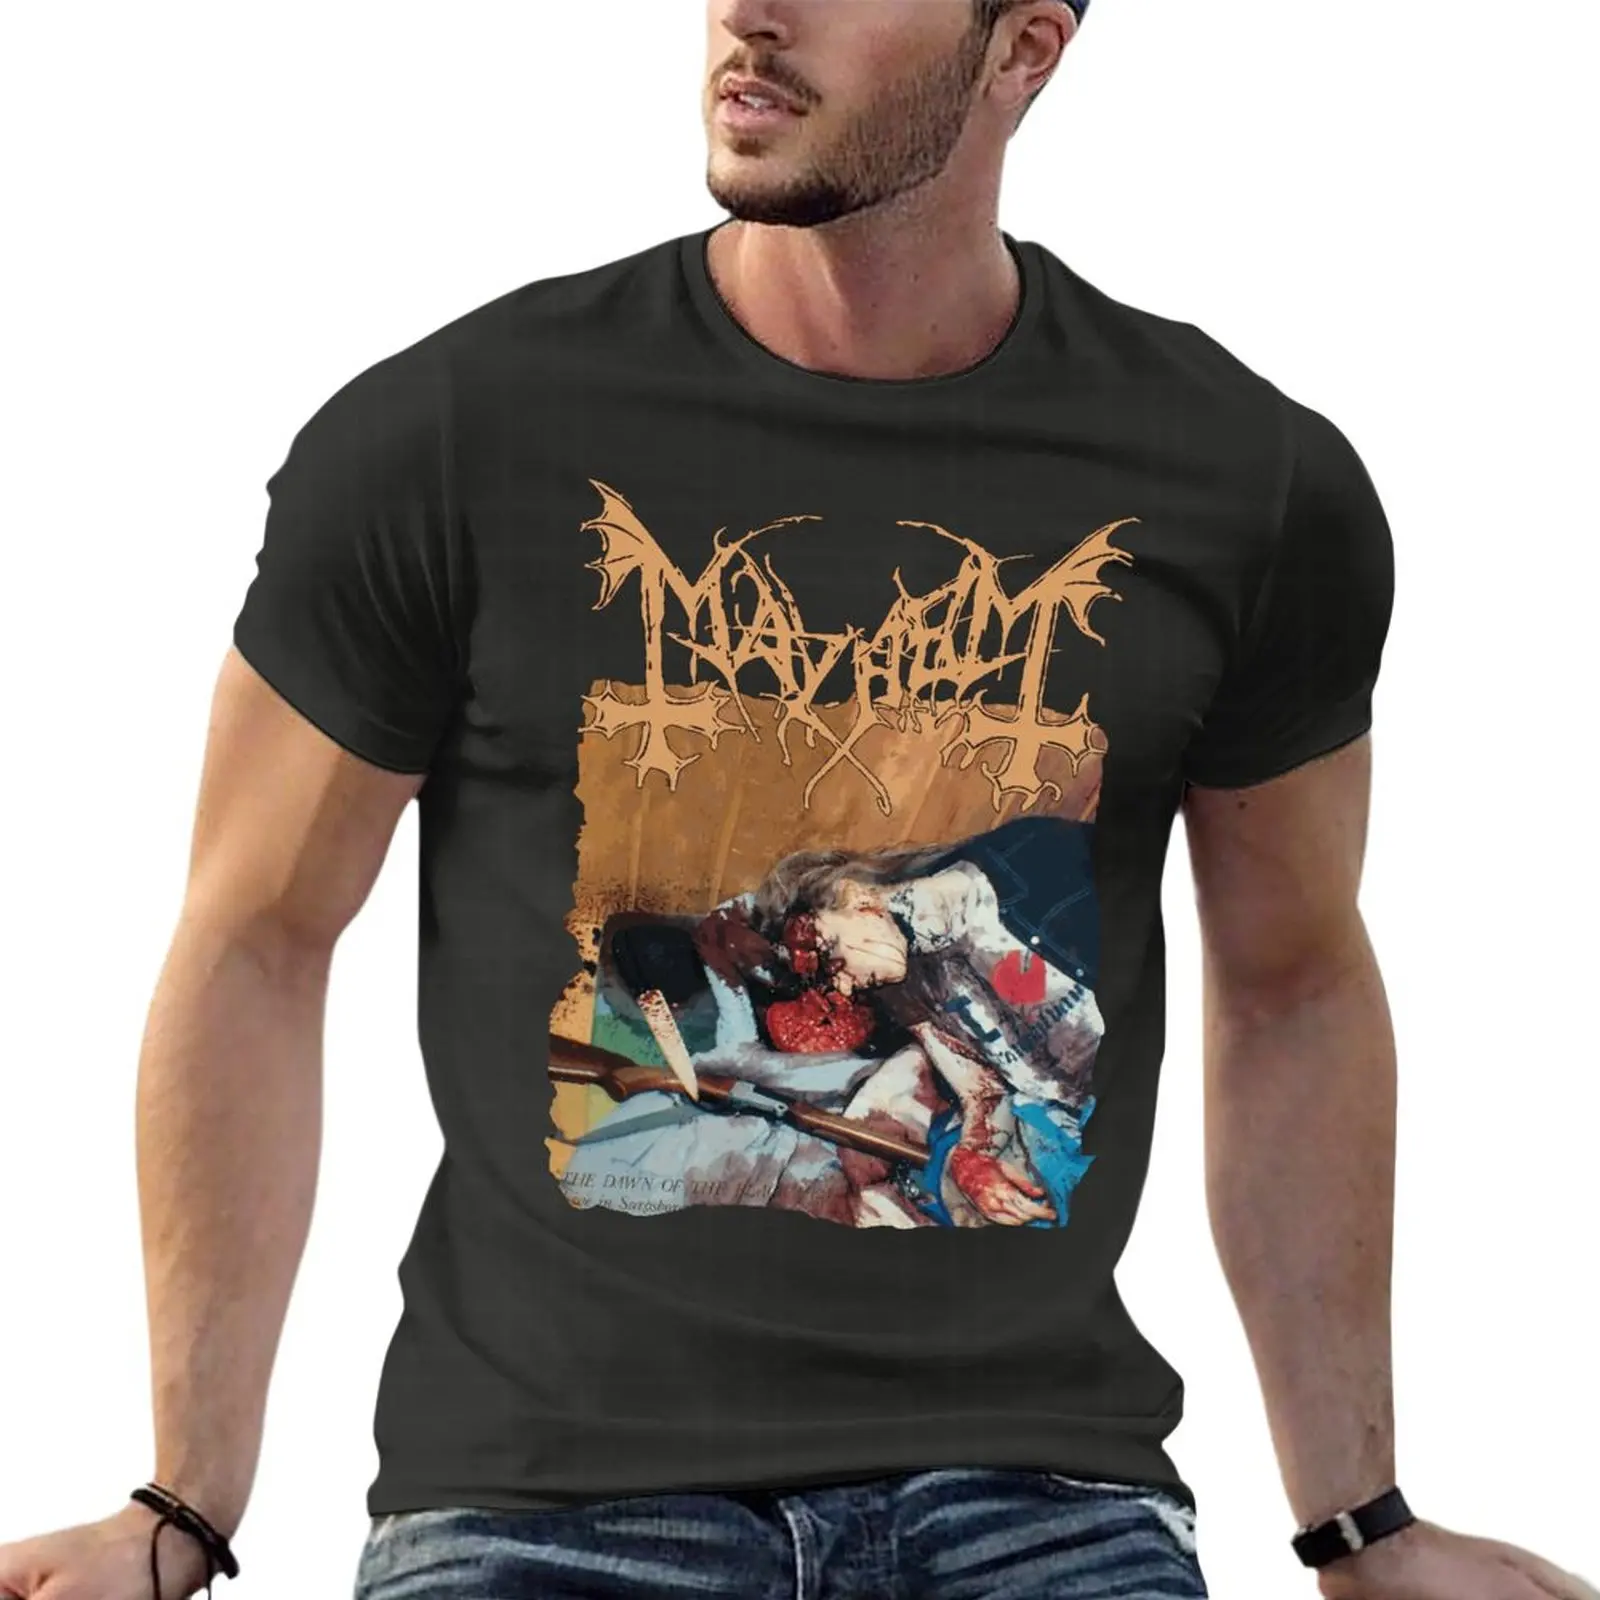 Mayhem Death Metal Band Oversized T Shirts For Mens Clothing 100% Cotton Streetwear Plus Size Top Tee